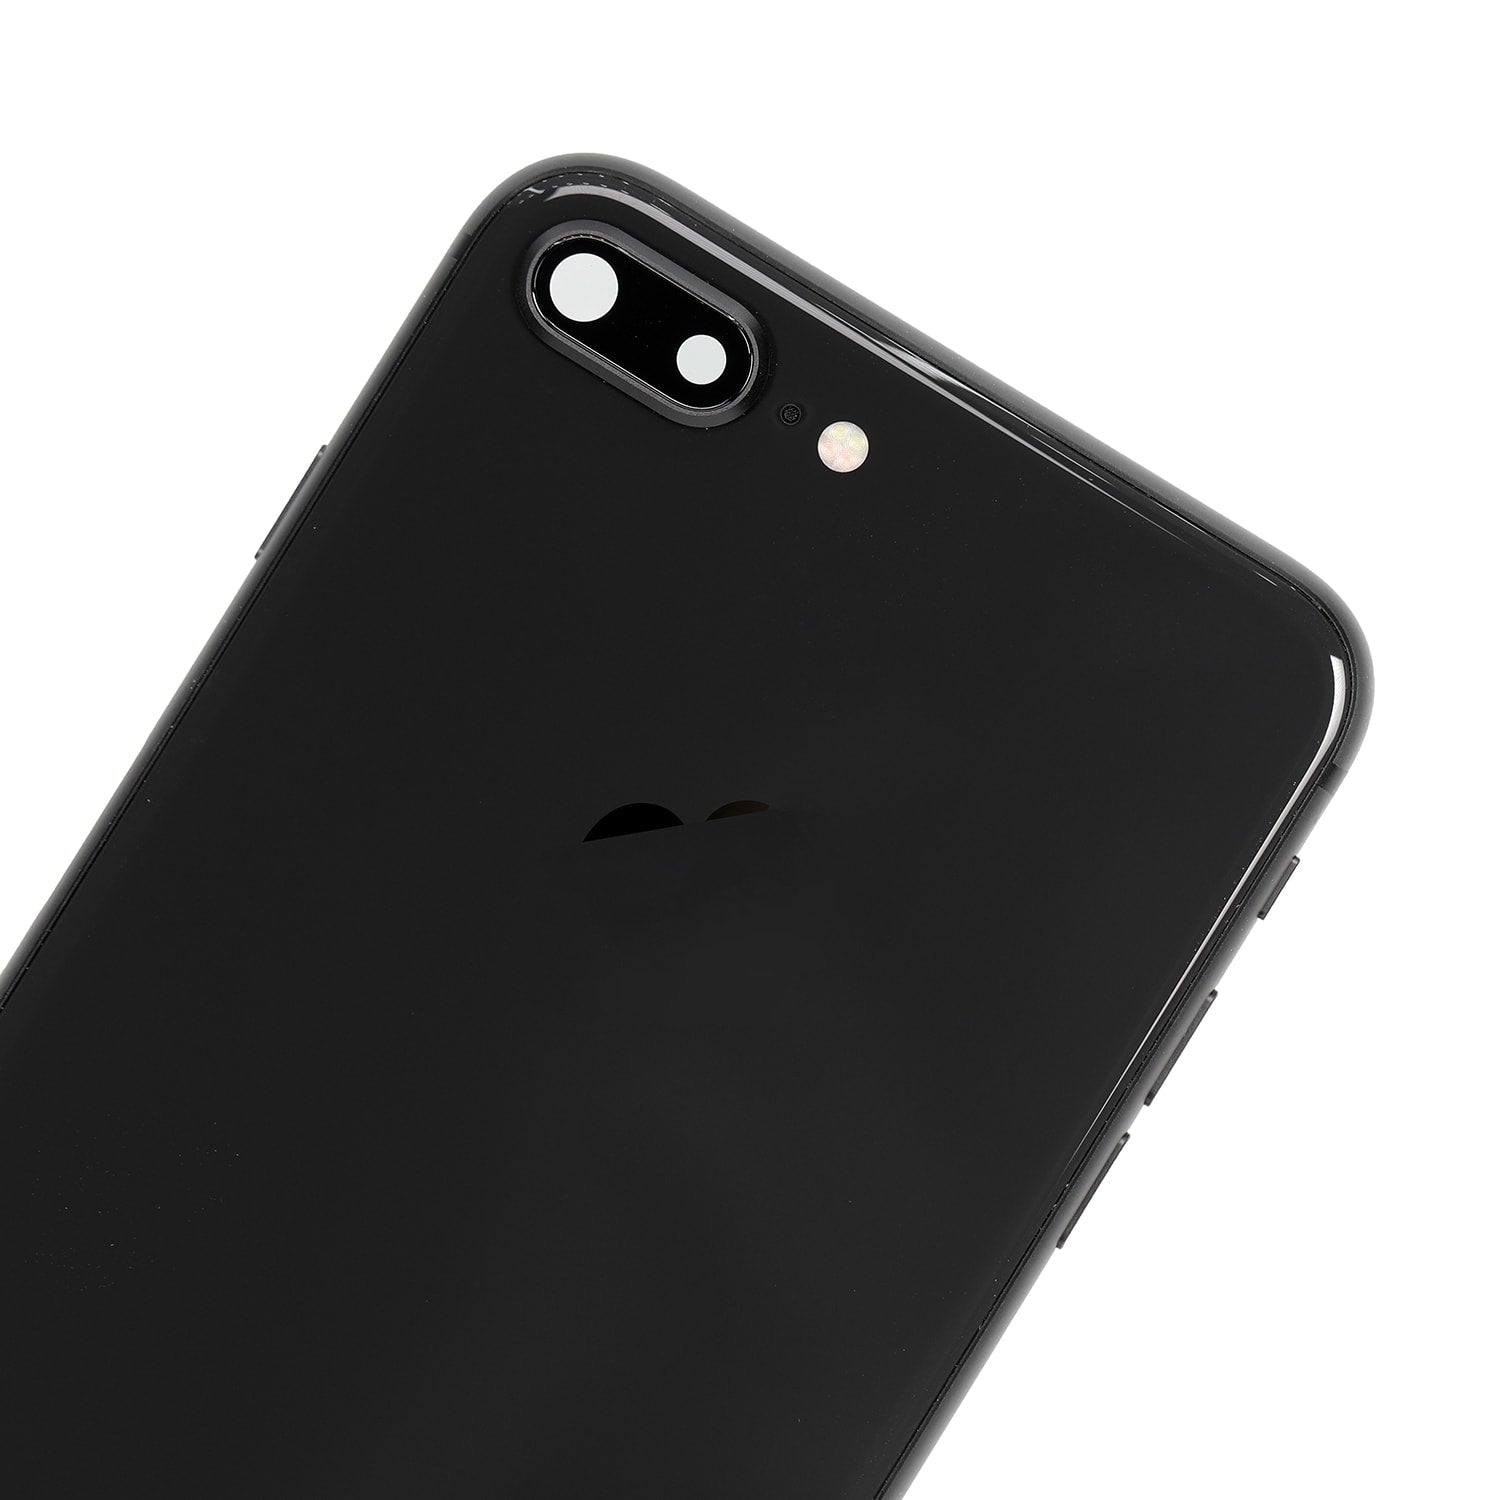 SPACE GRAY BACK COVER FULL ASSEMBLY FOR IPHONE 8 PLUS